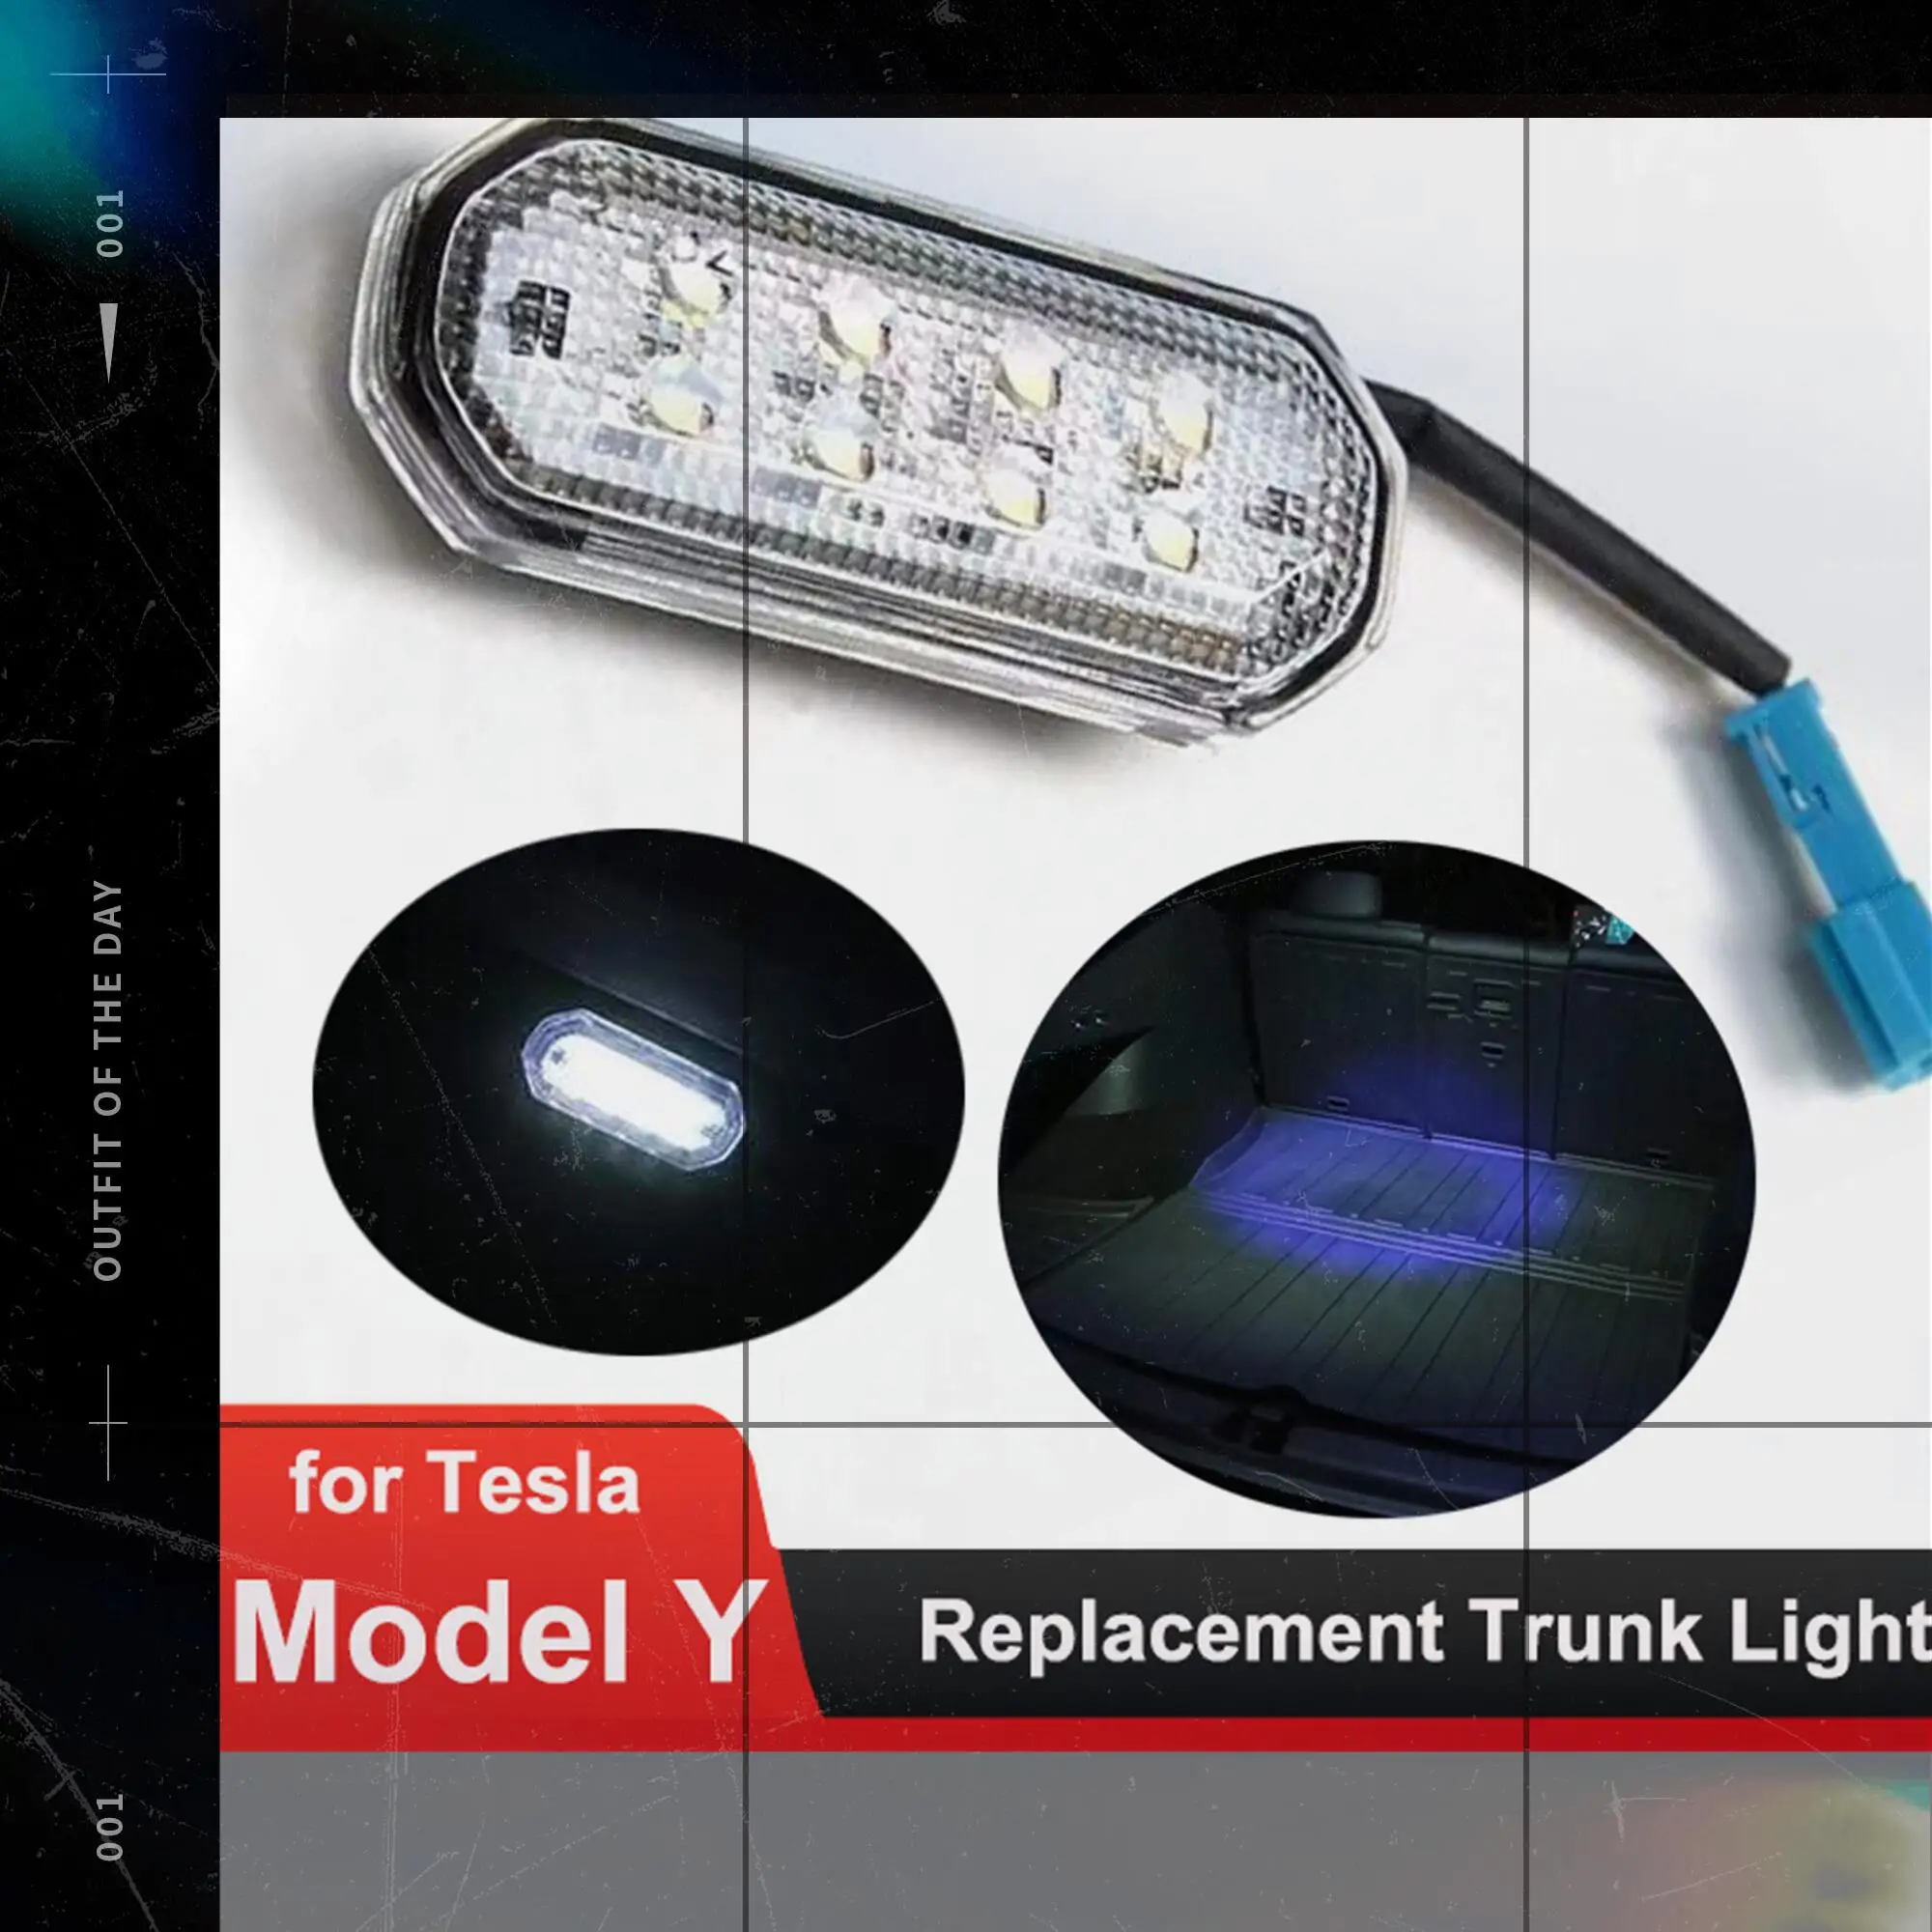 

MODELY 2021 Replacement LED Trunk For Tesla Model Y 2022 8LED Beads Ultra-Bright Easy-Plug Lighting Car Upgrade Light Bulbs Kit